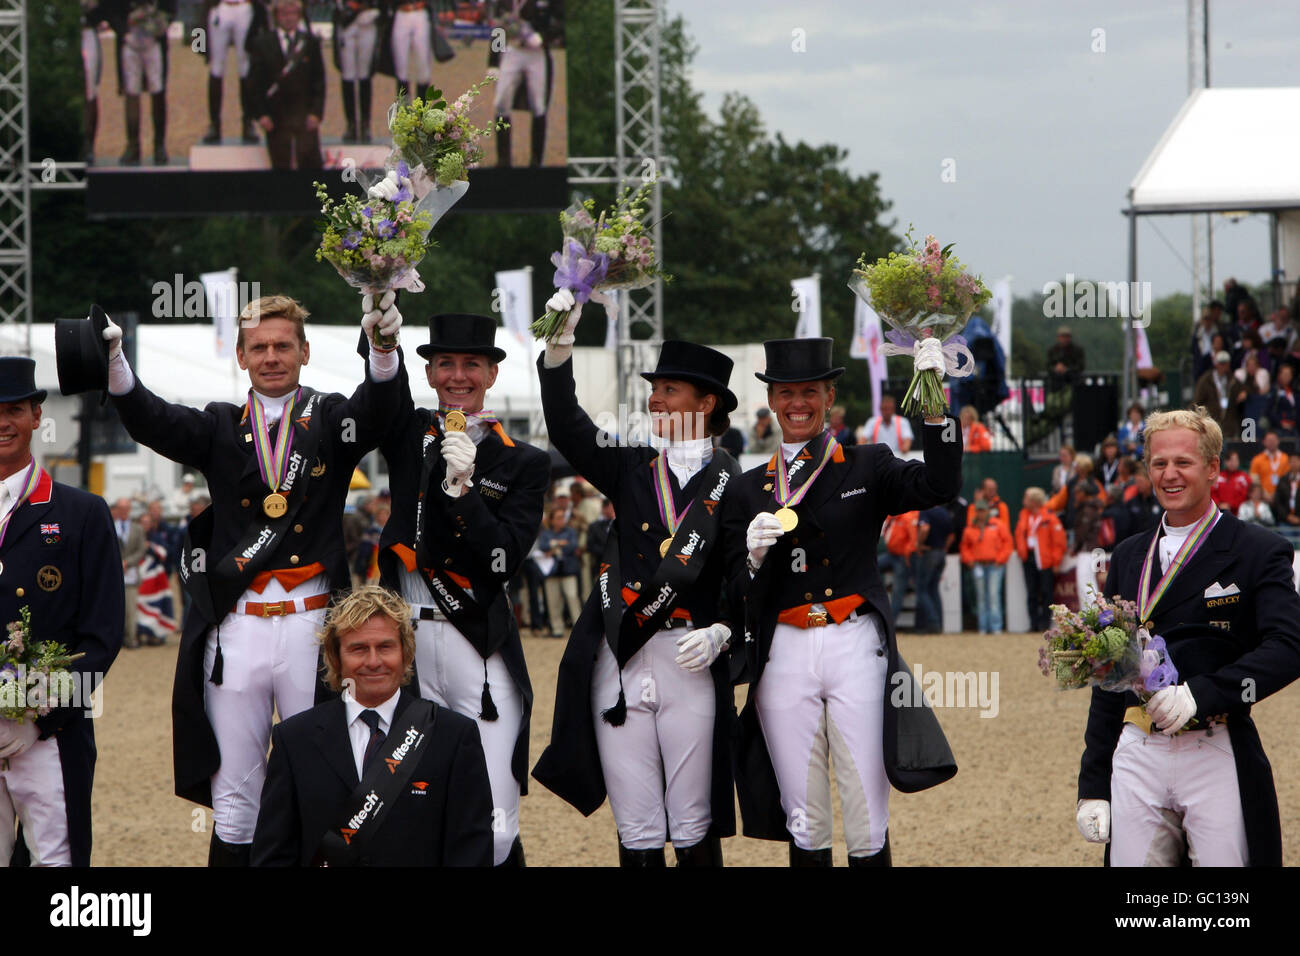 The Netherlands team with their gold medals from the FEI European Dressage Championship 2009, team and Individual competition in the grounds of Windsor Castle, Berkshire. Stock Photo